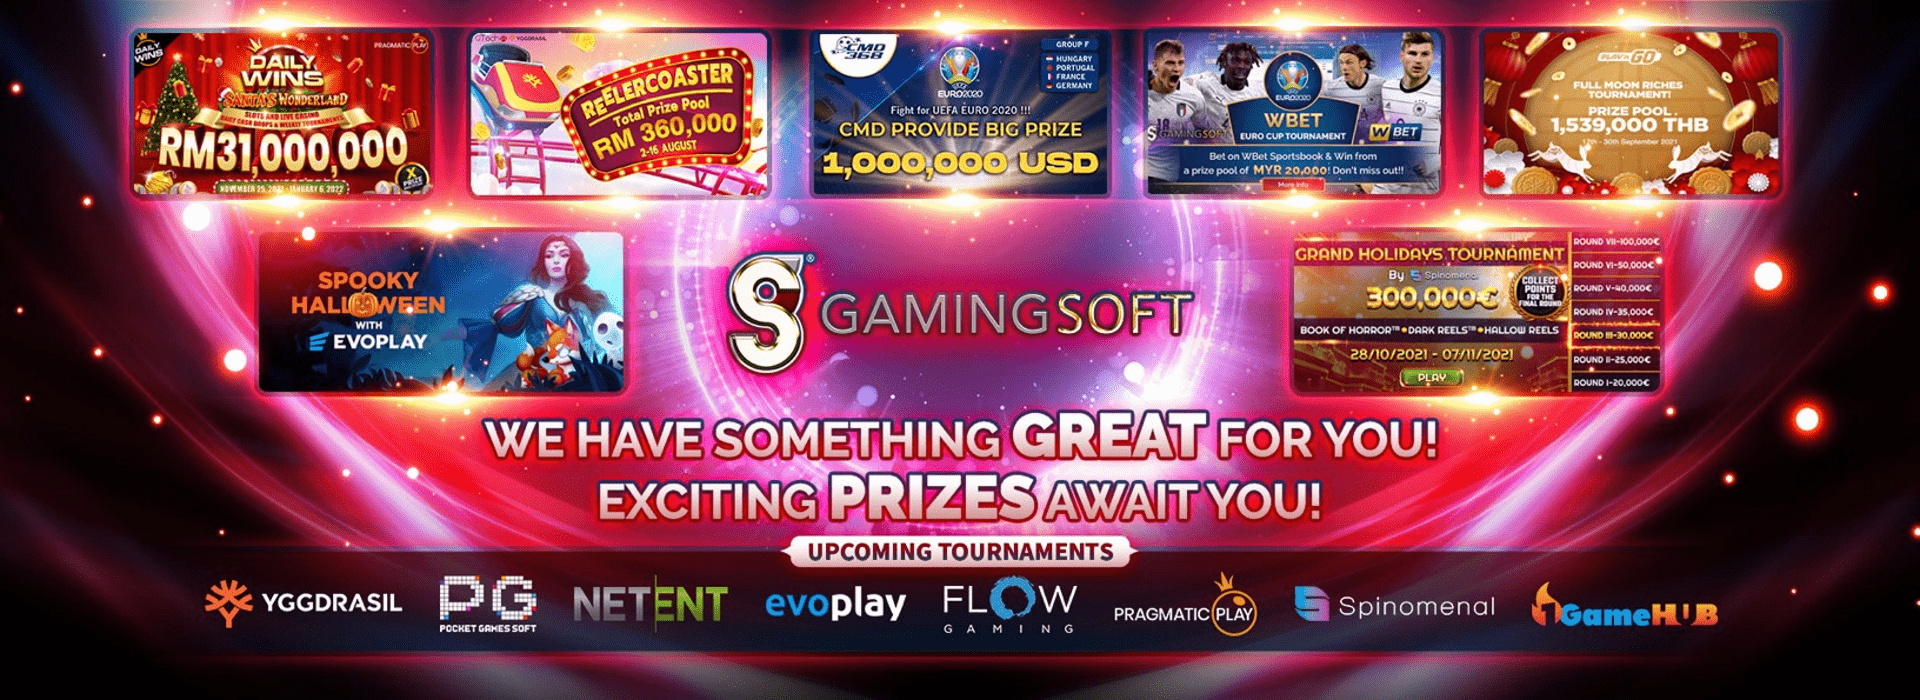 Upcoming Tournament Exciting Prizes Await You Web Banner - GamingSoft